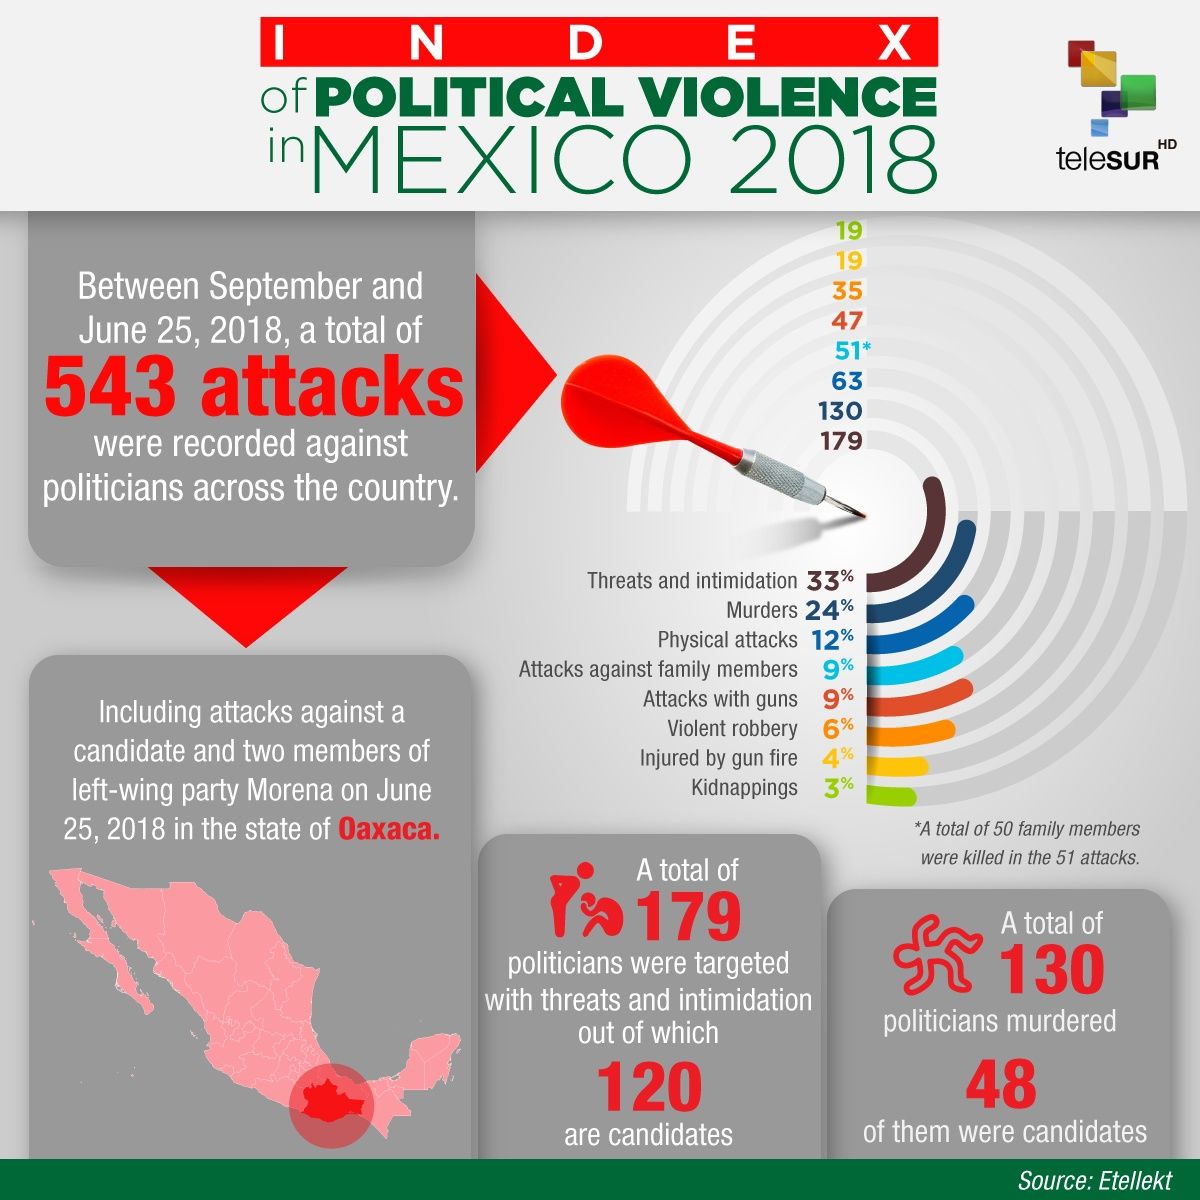 Index of Political Violence In Mexico 2018